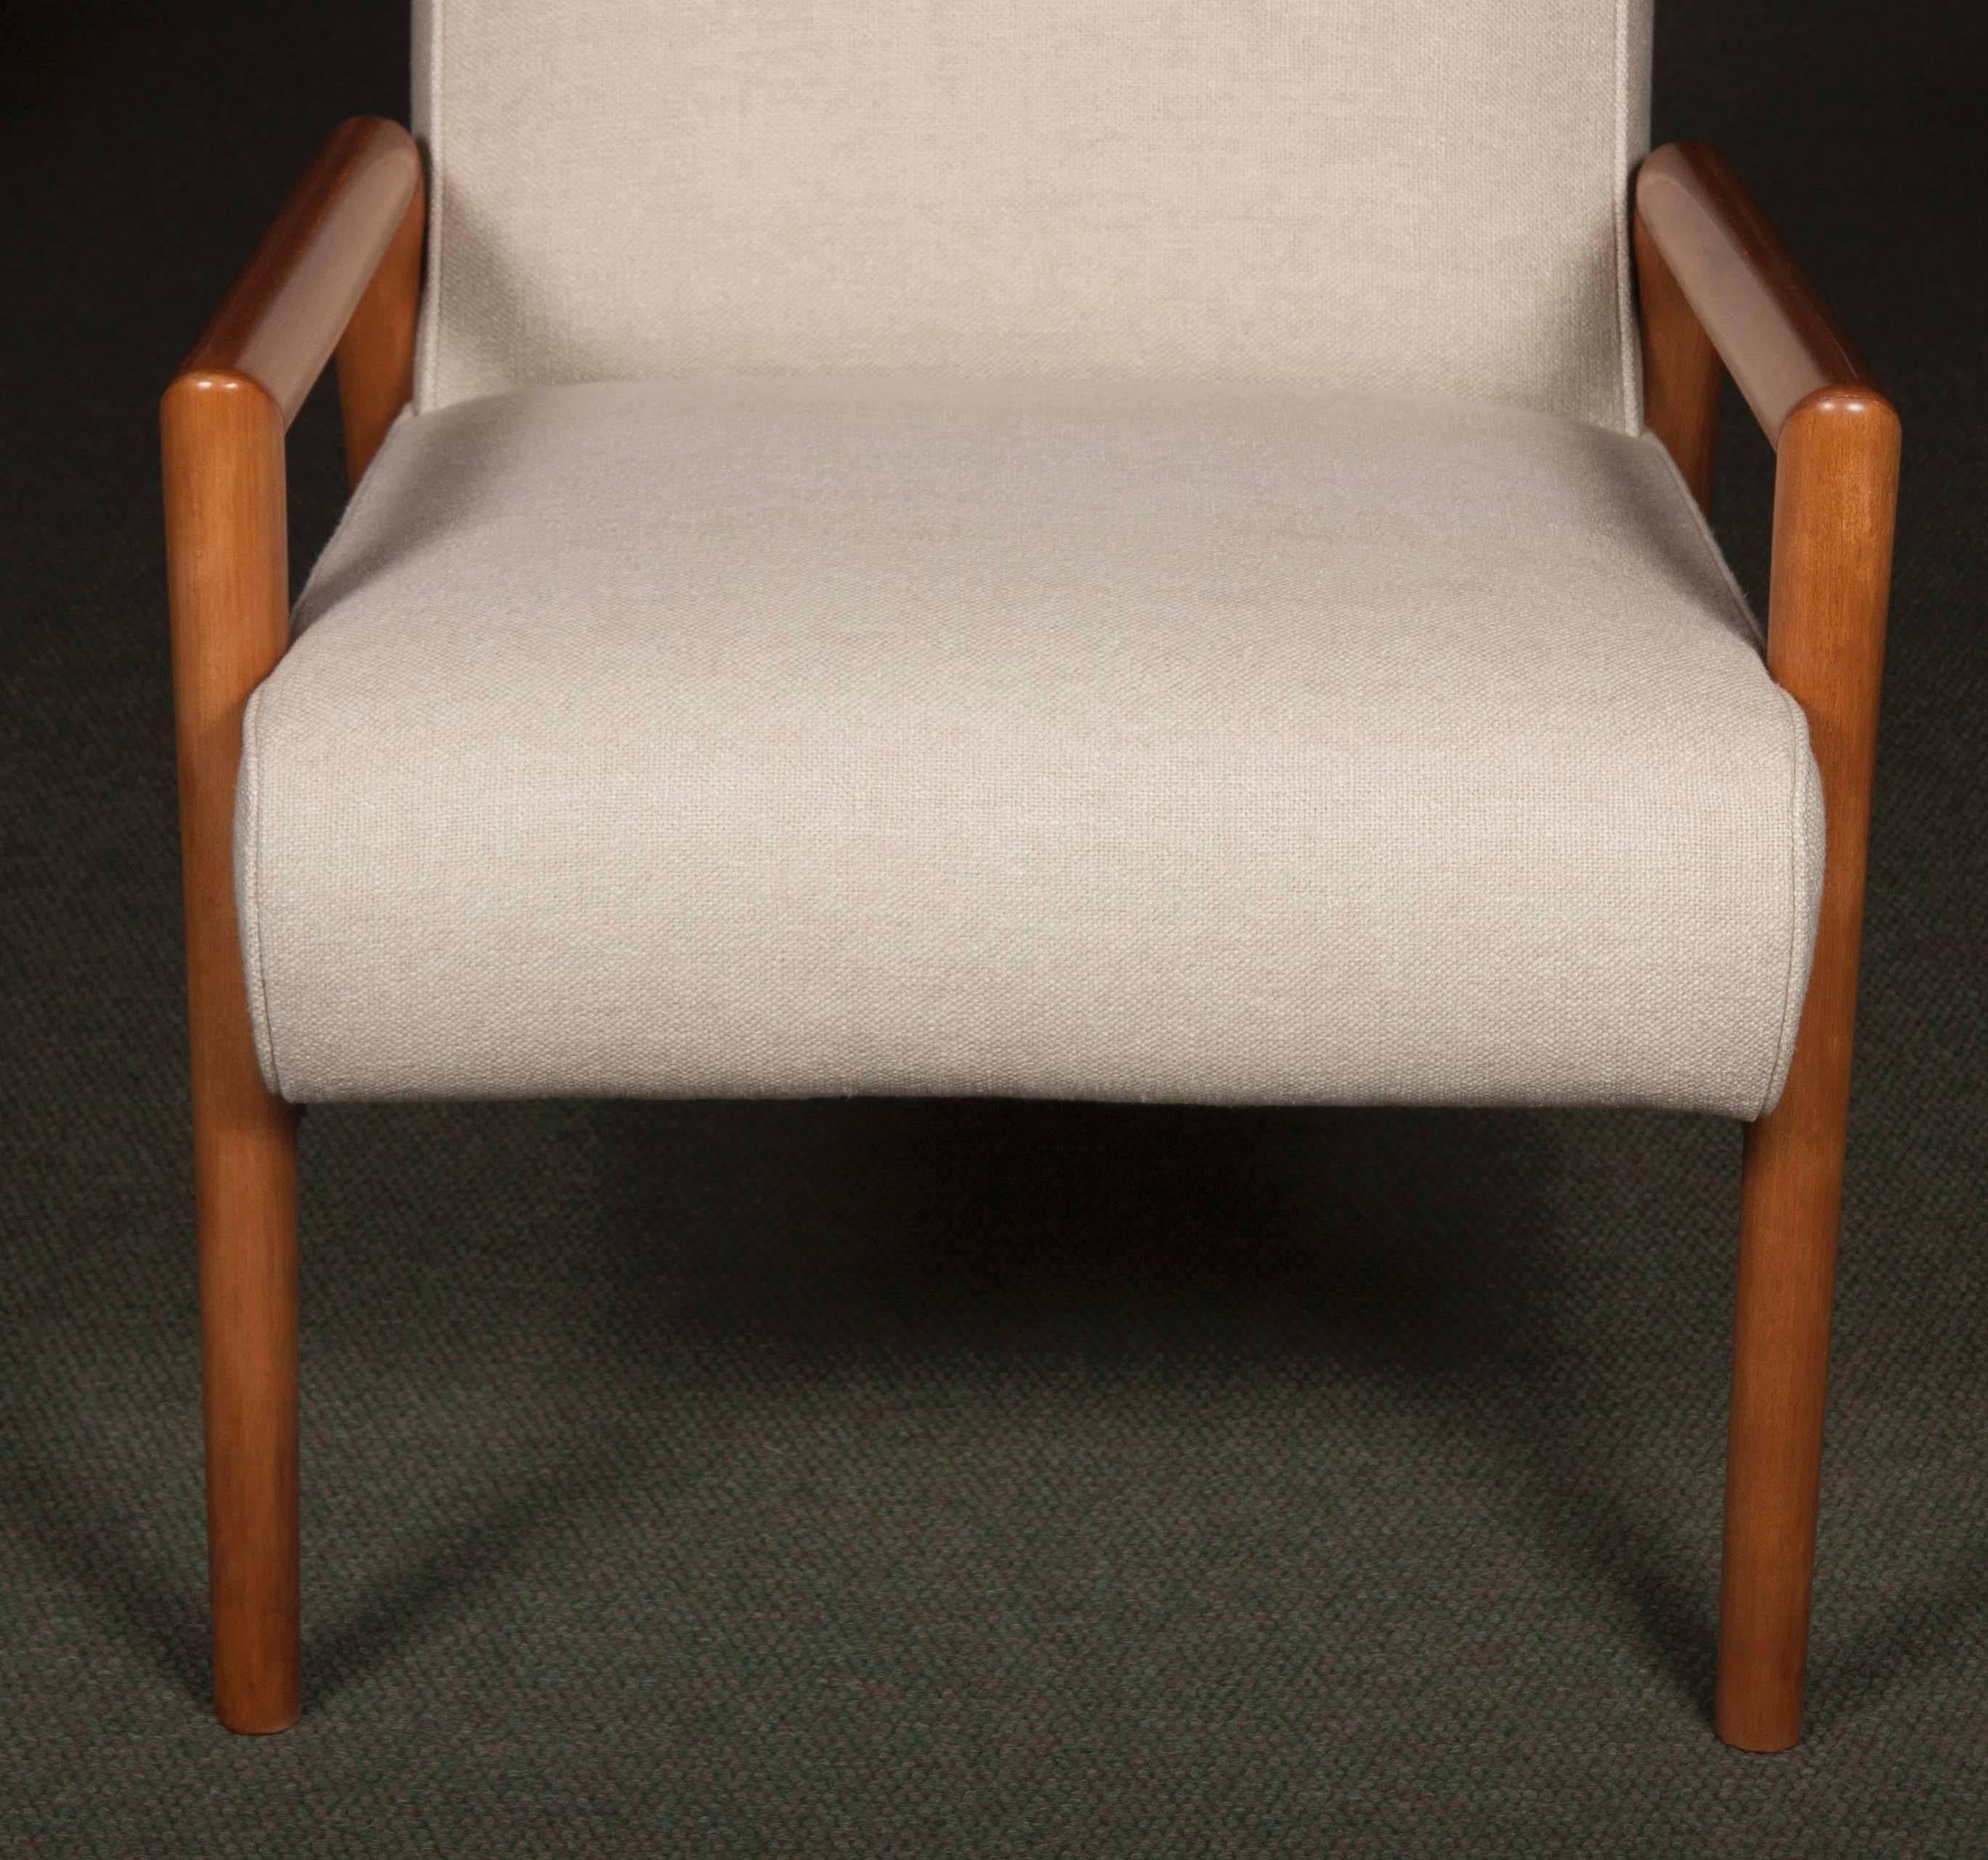 20th Century Open Armchair Designed by Leslie Diamond, Pair Available, Priced Individually 